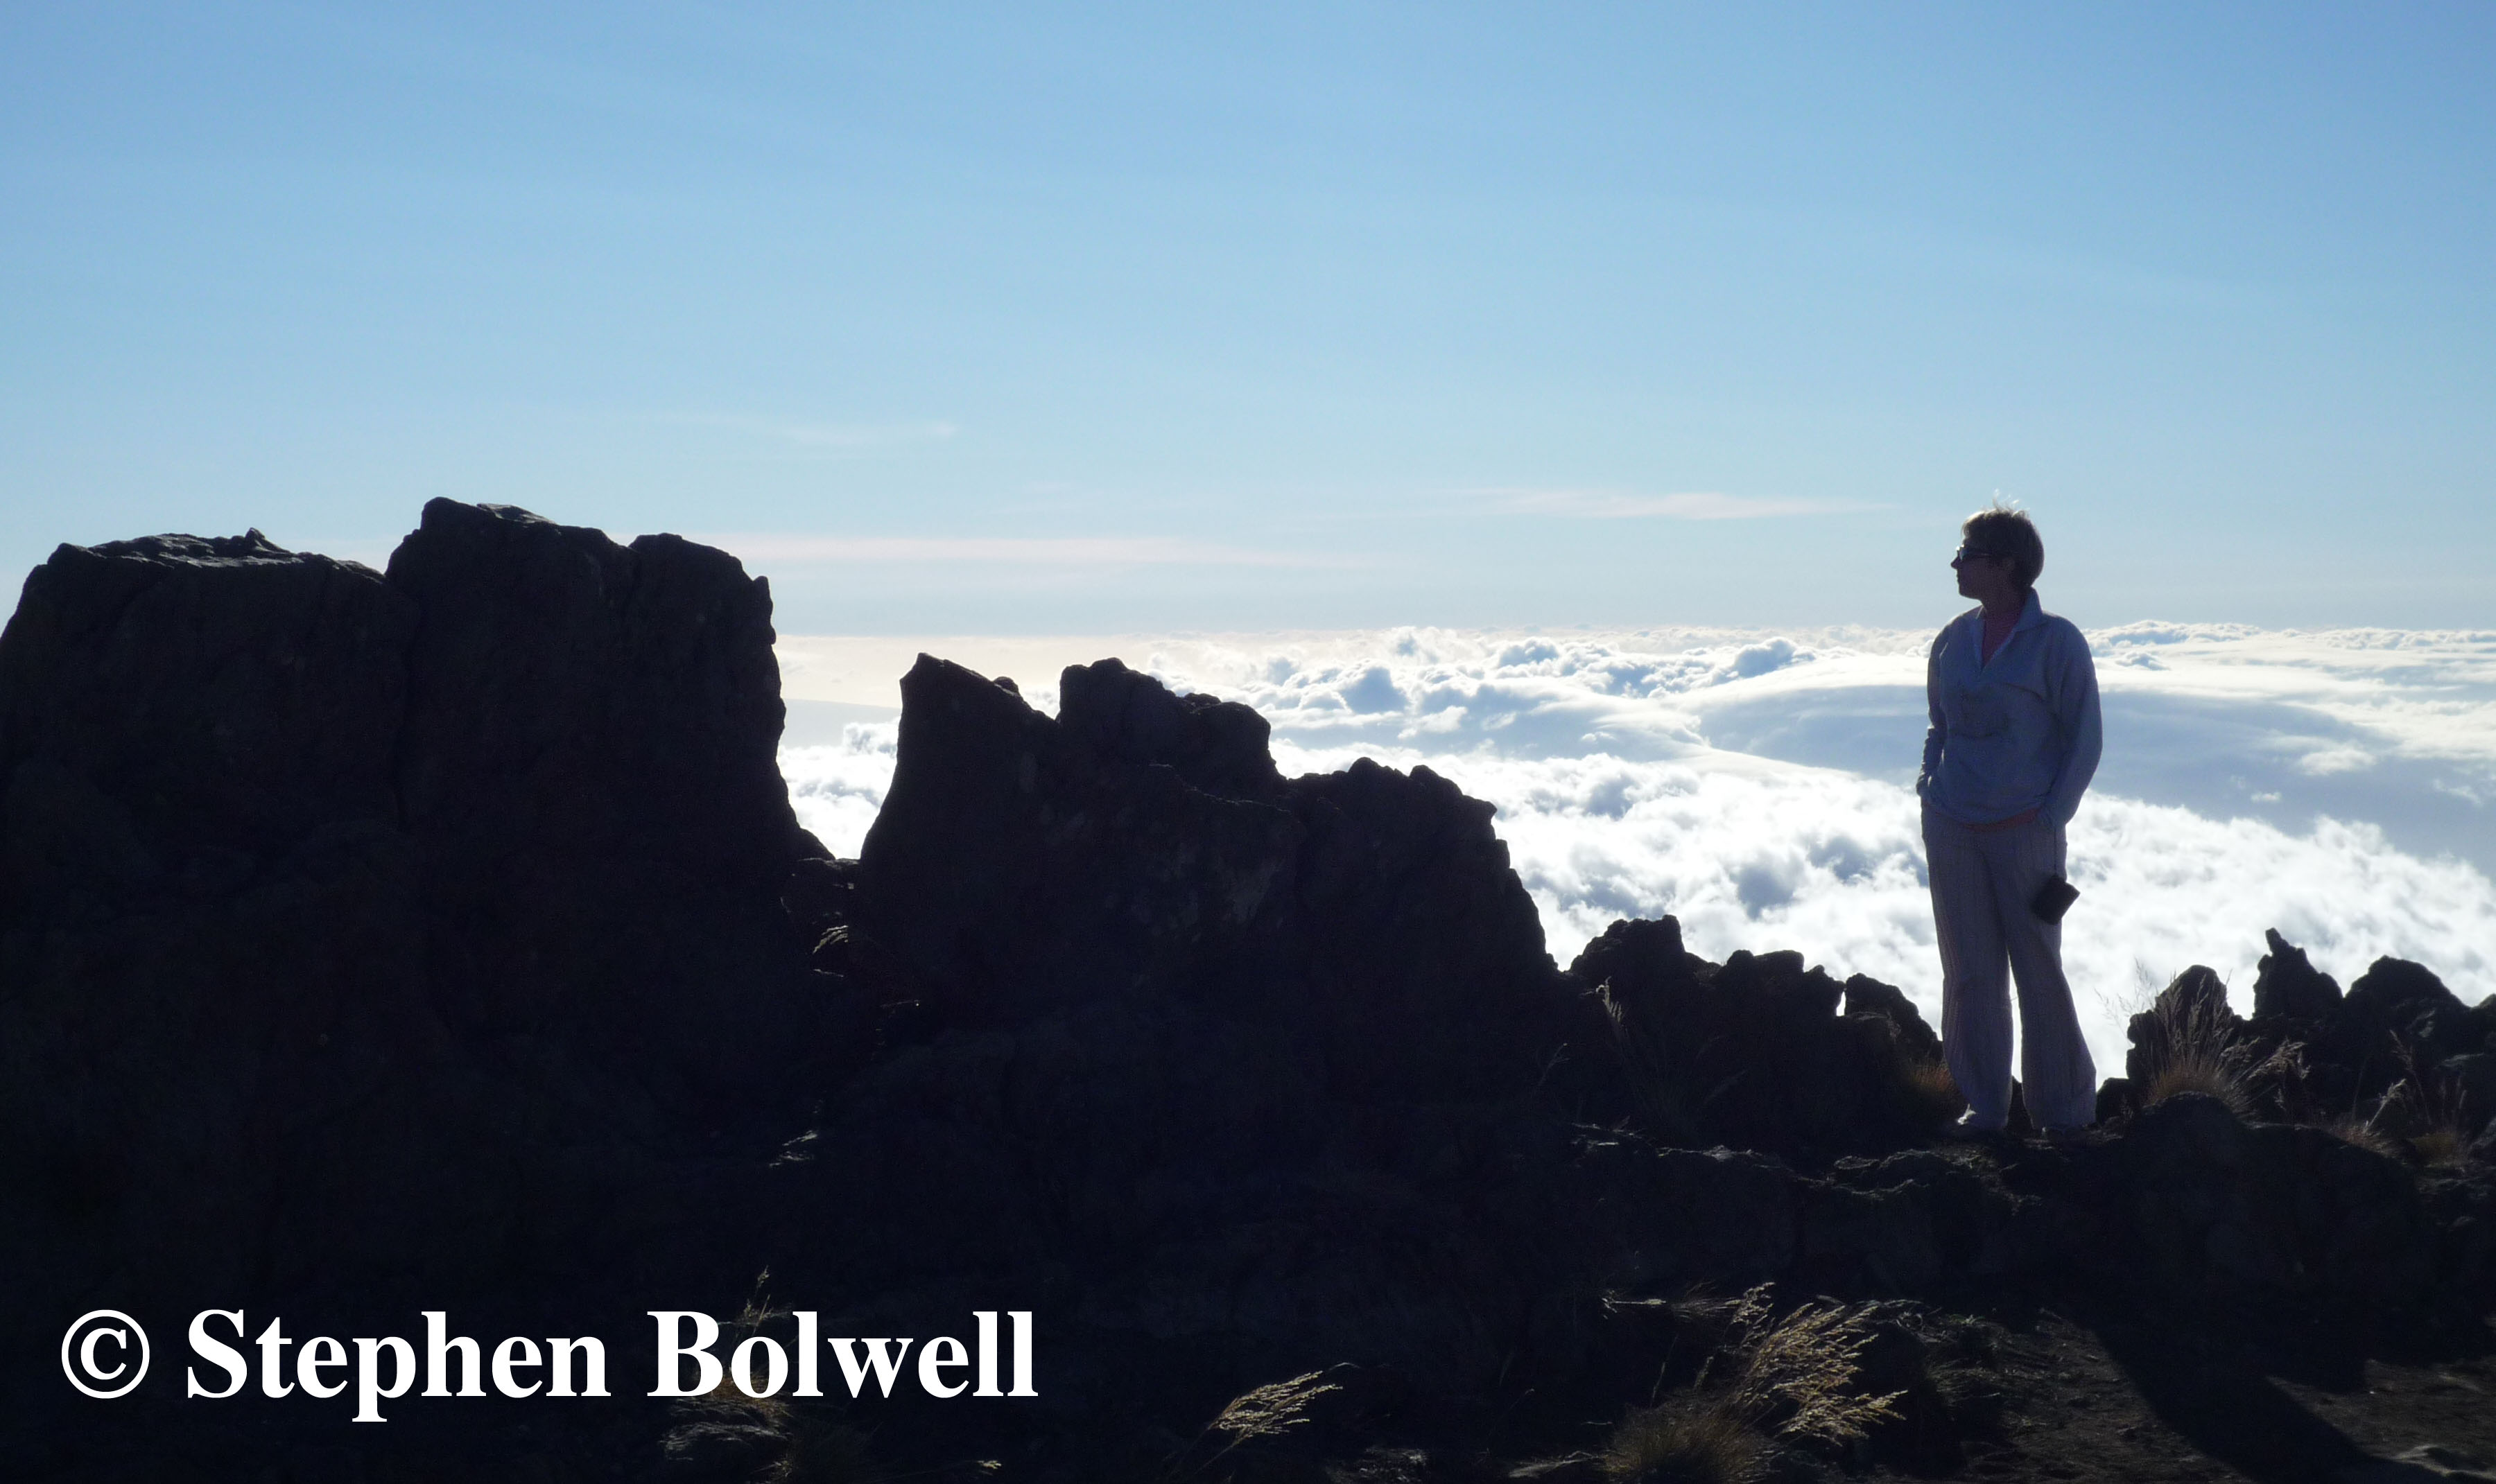 My wife Jen on Haleakala in 2010. Up above the clouds so high.